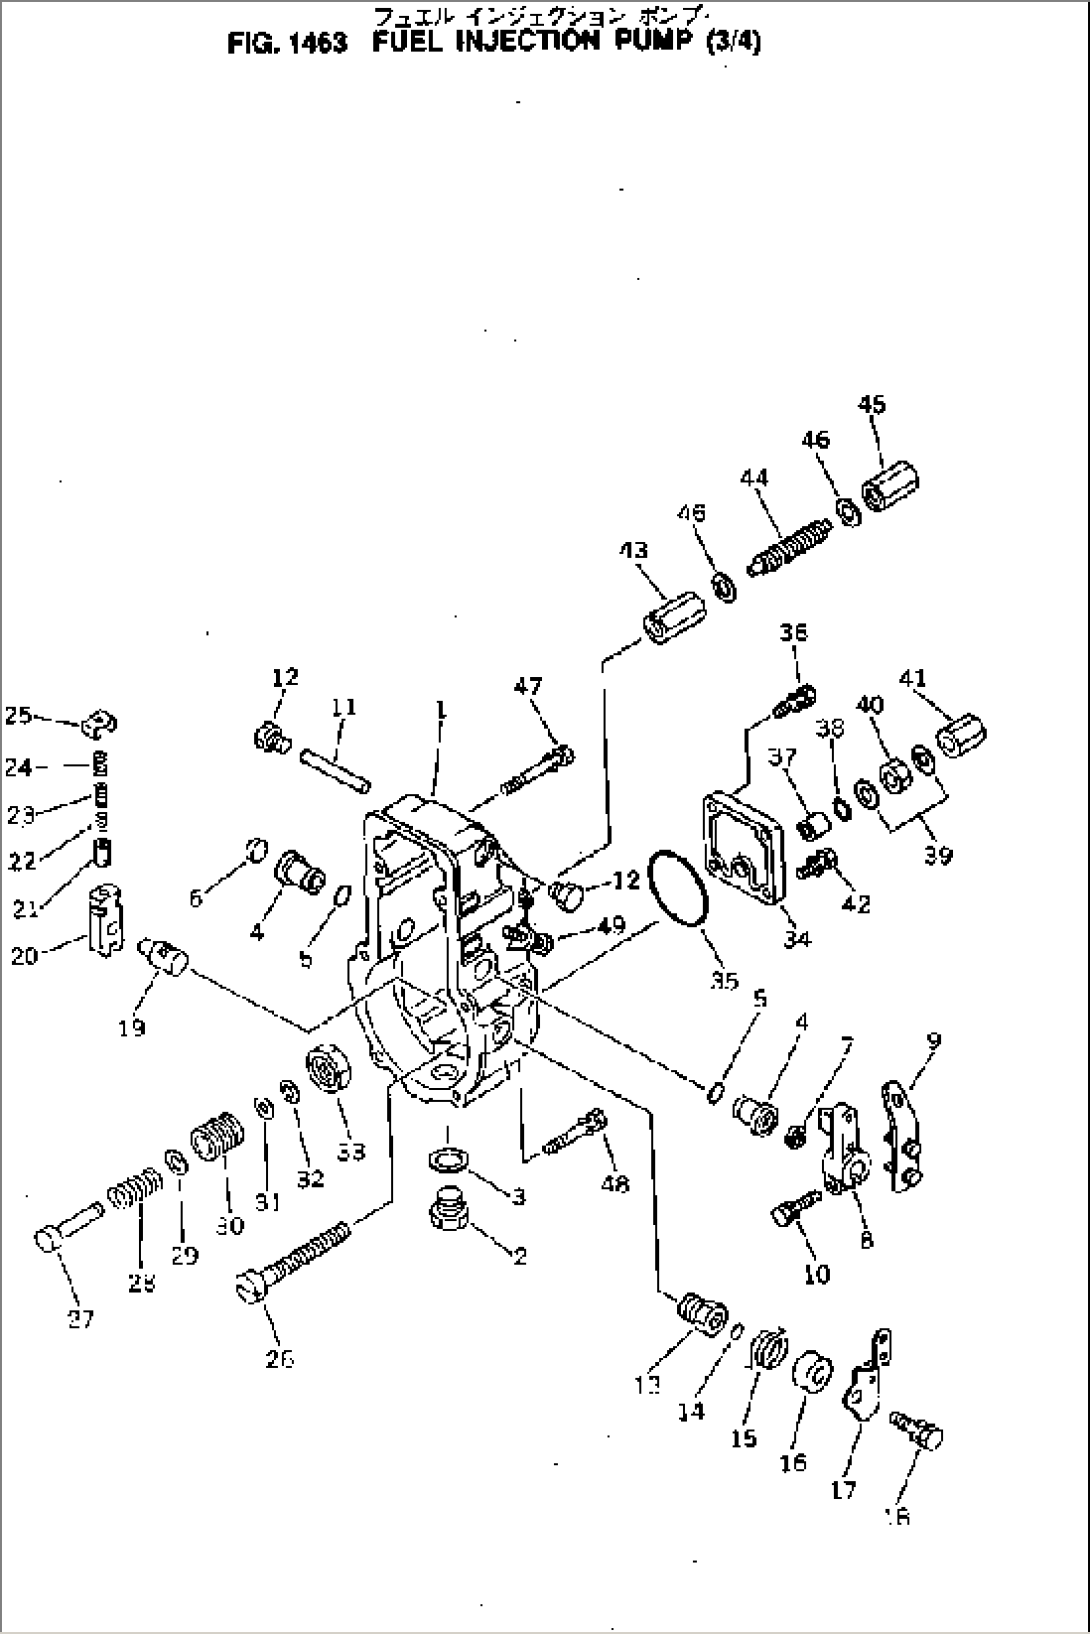 FUEL INJECTION PUMP (3/4)